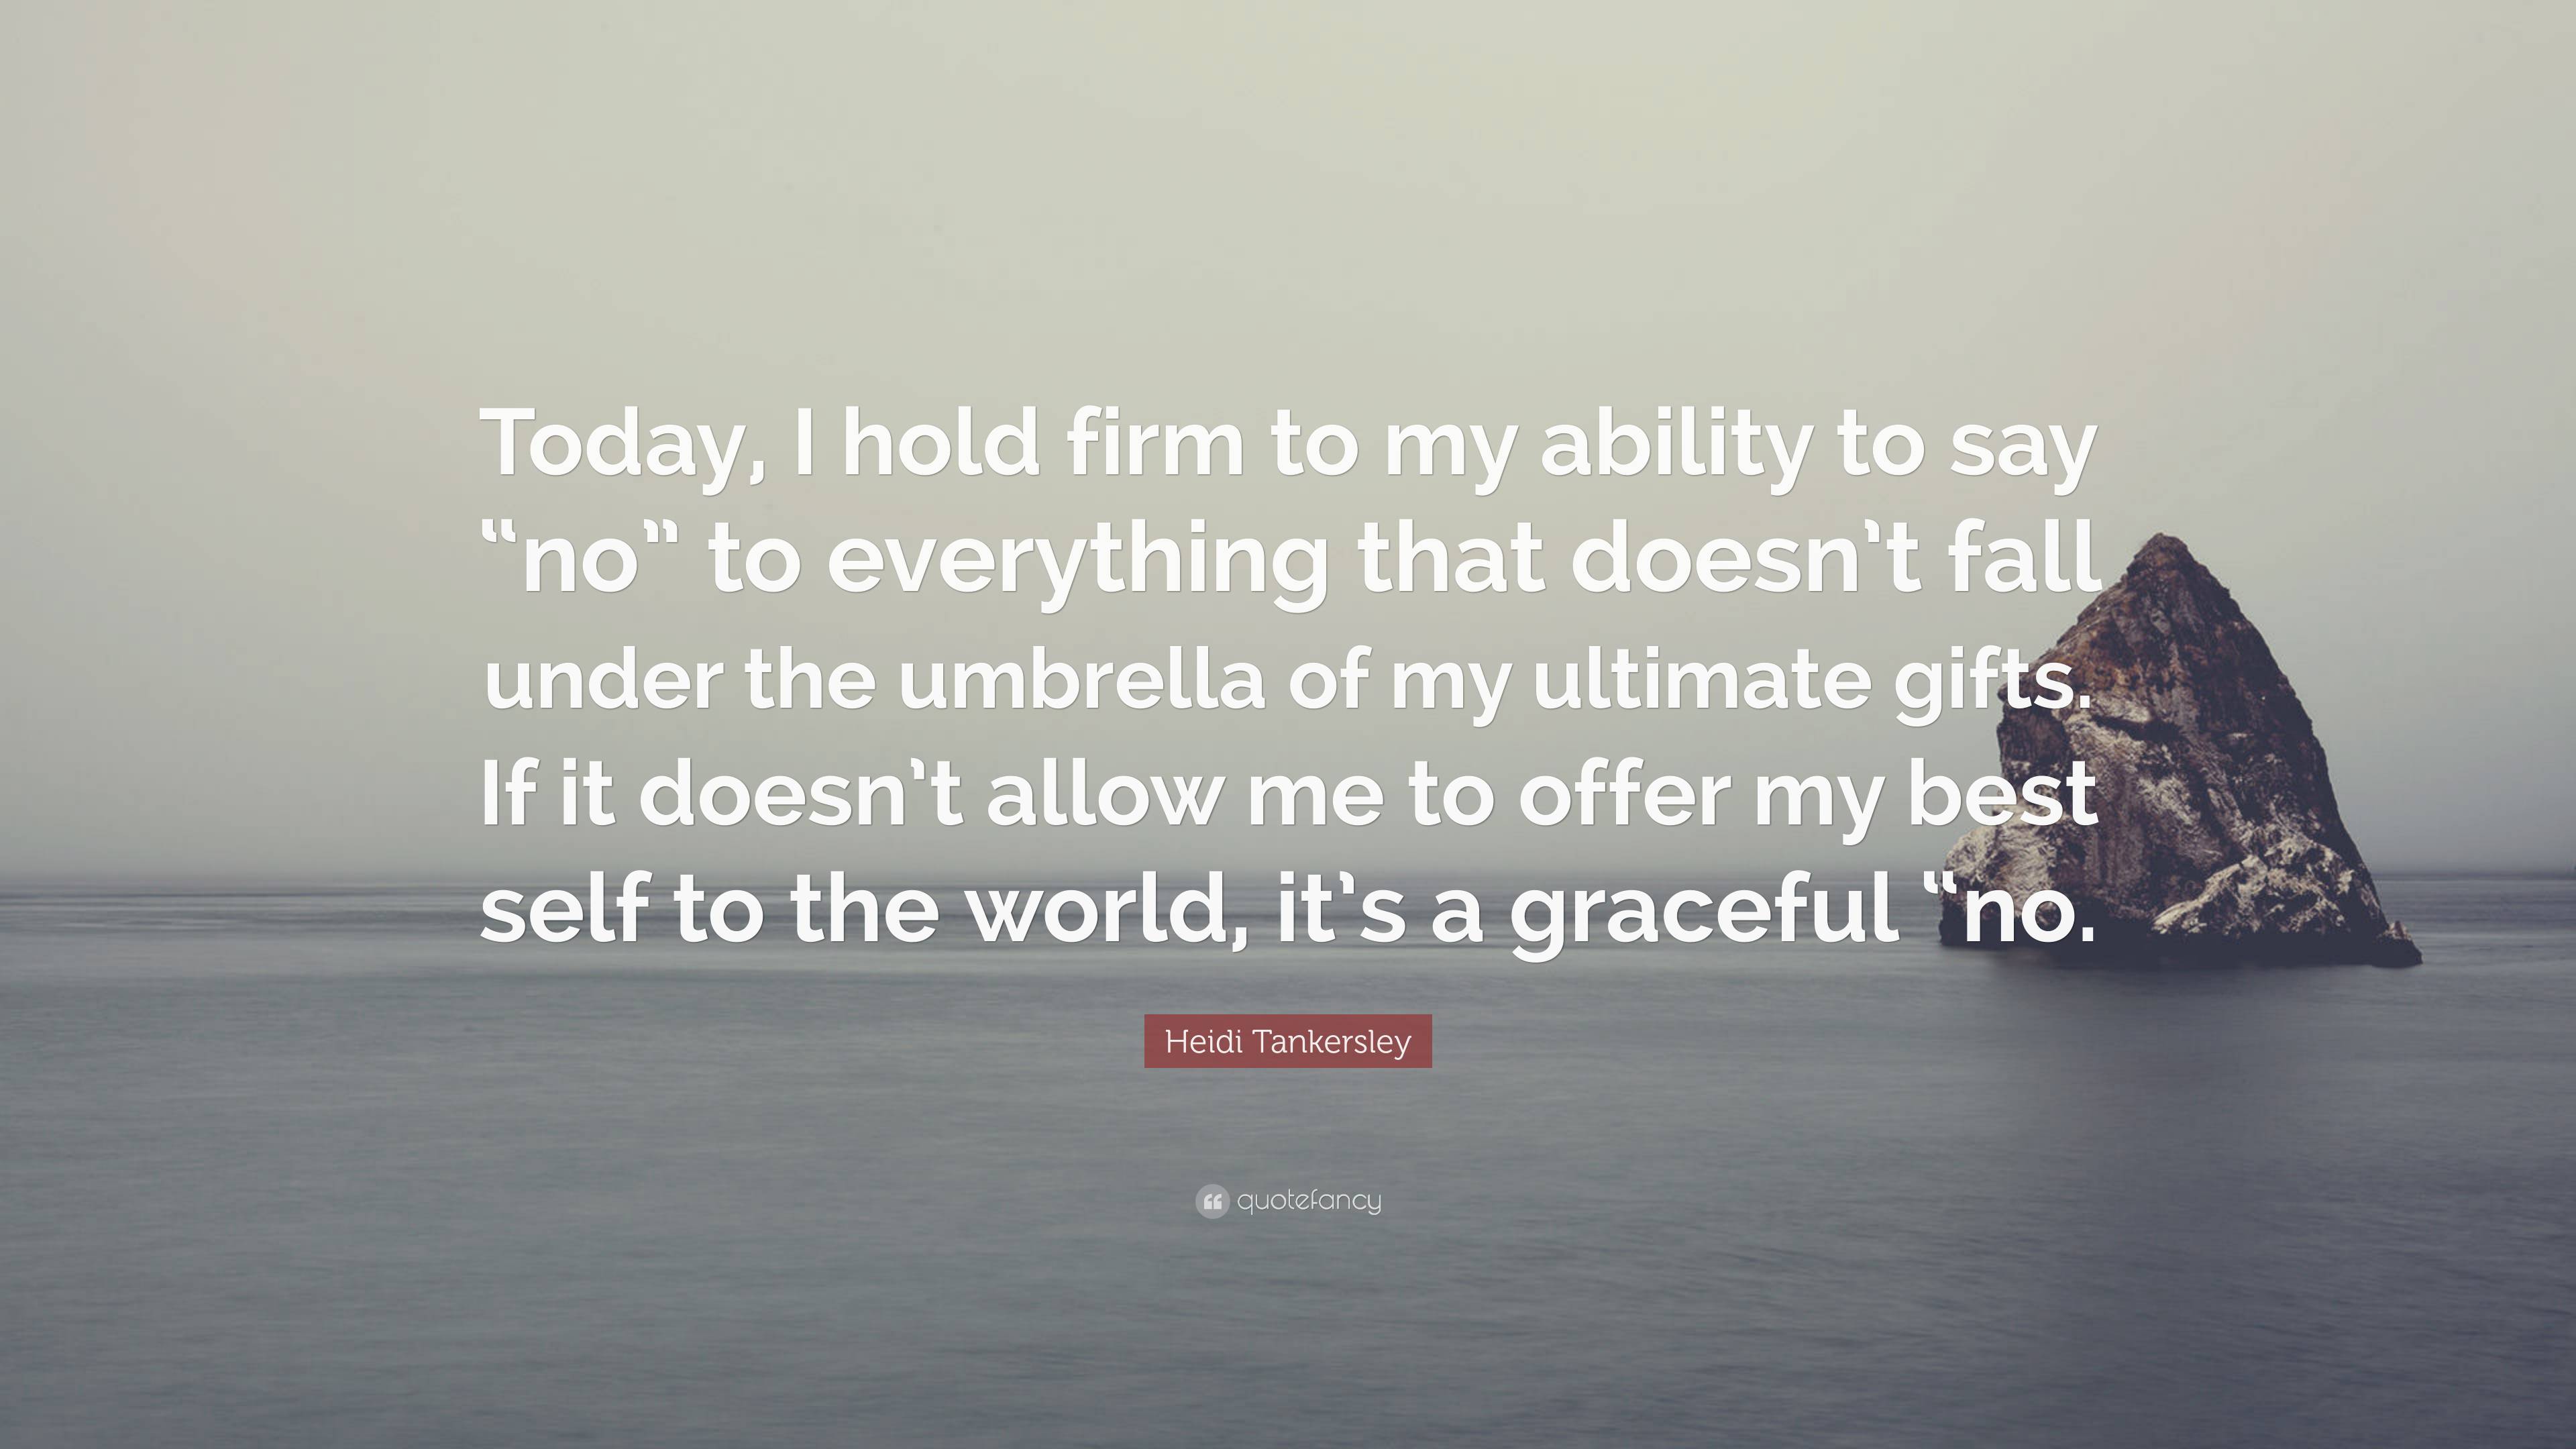 Heidi Tankersley Quote: “Today, I hold firm to my ability to say “no ...